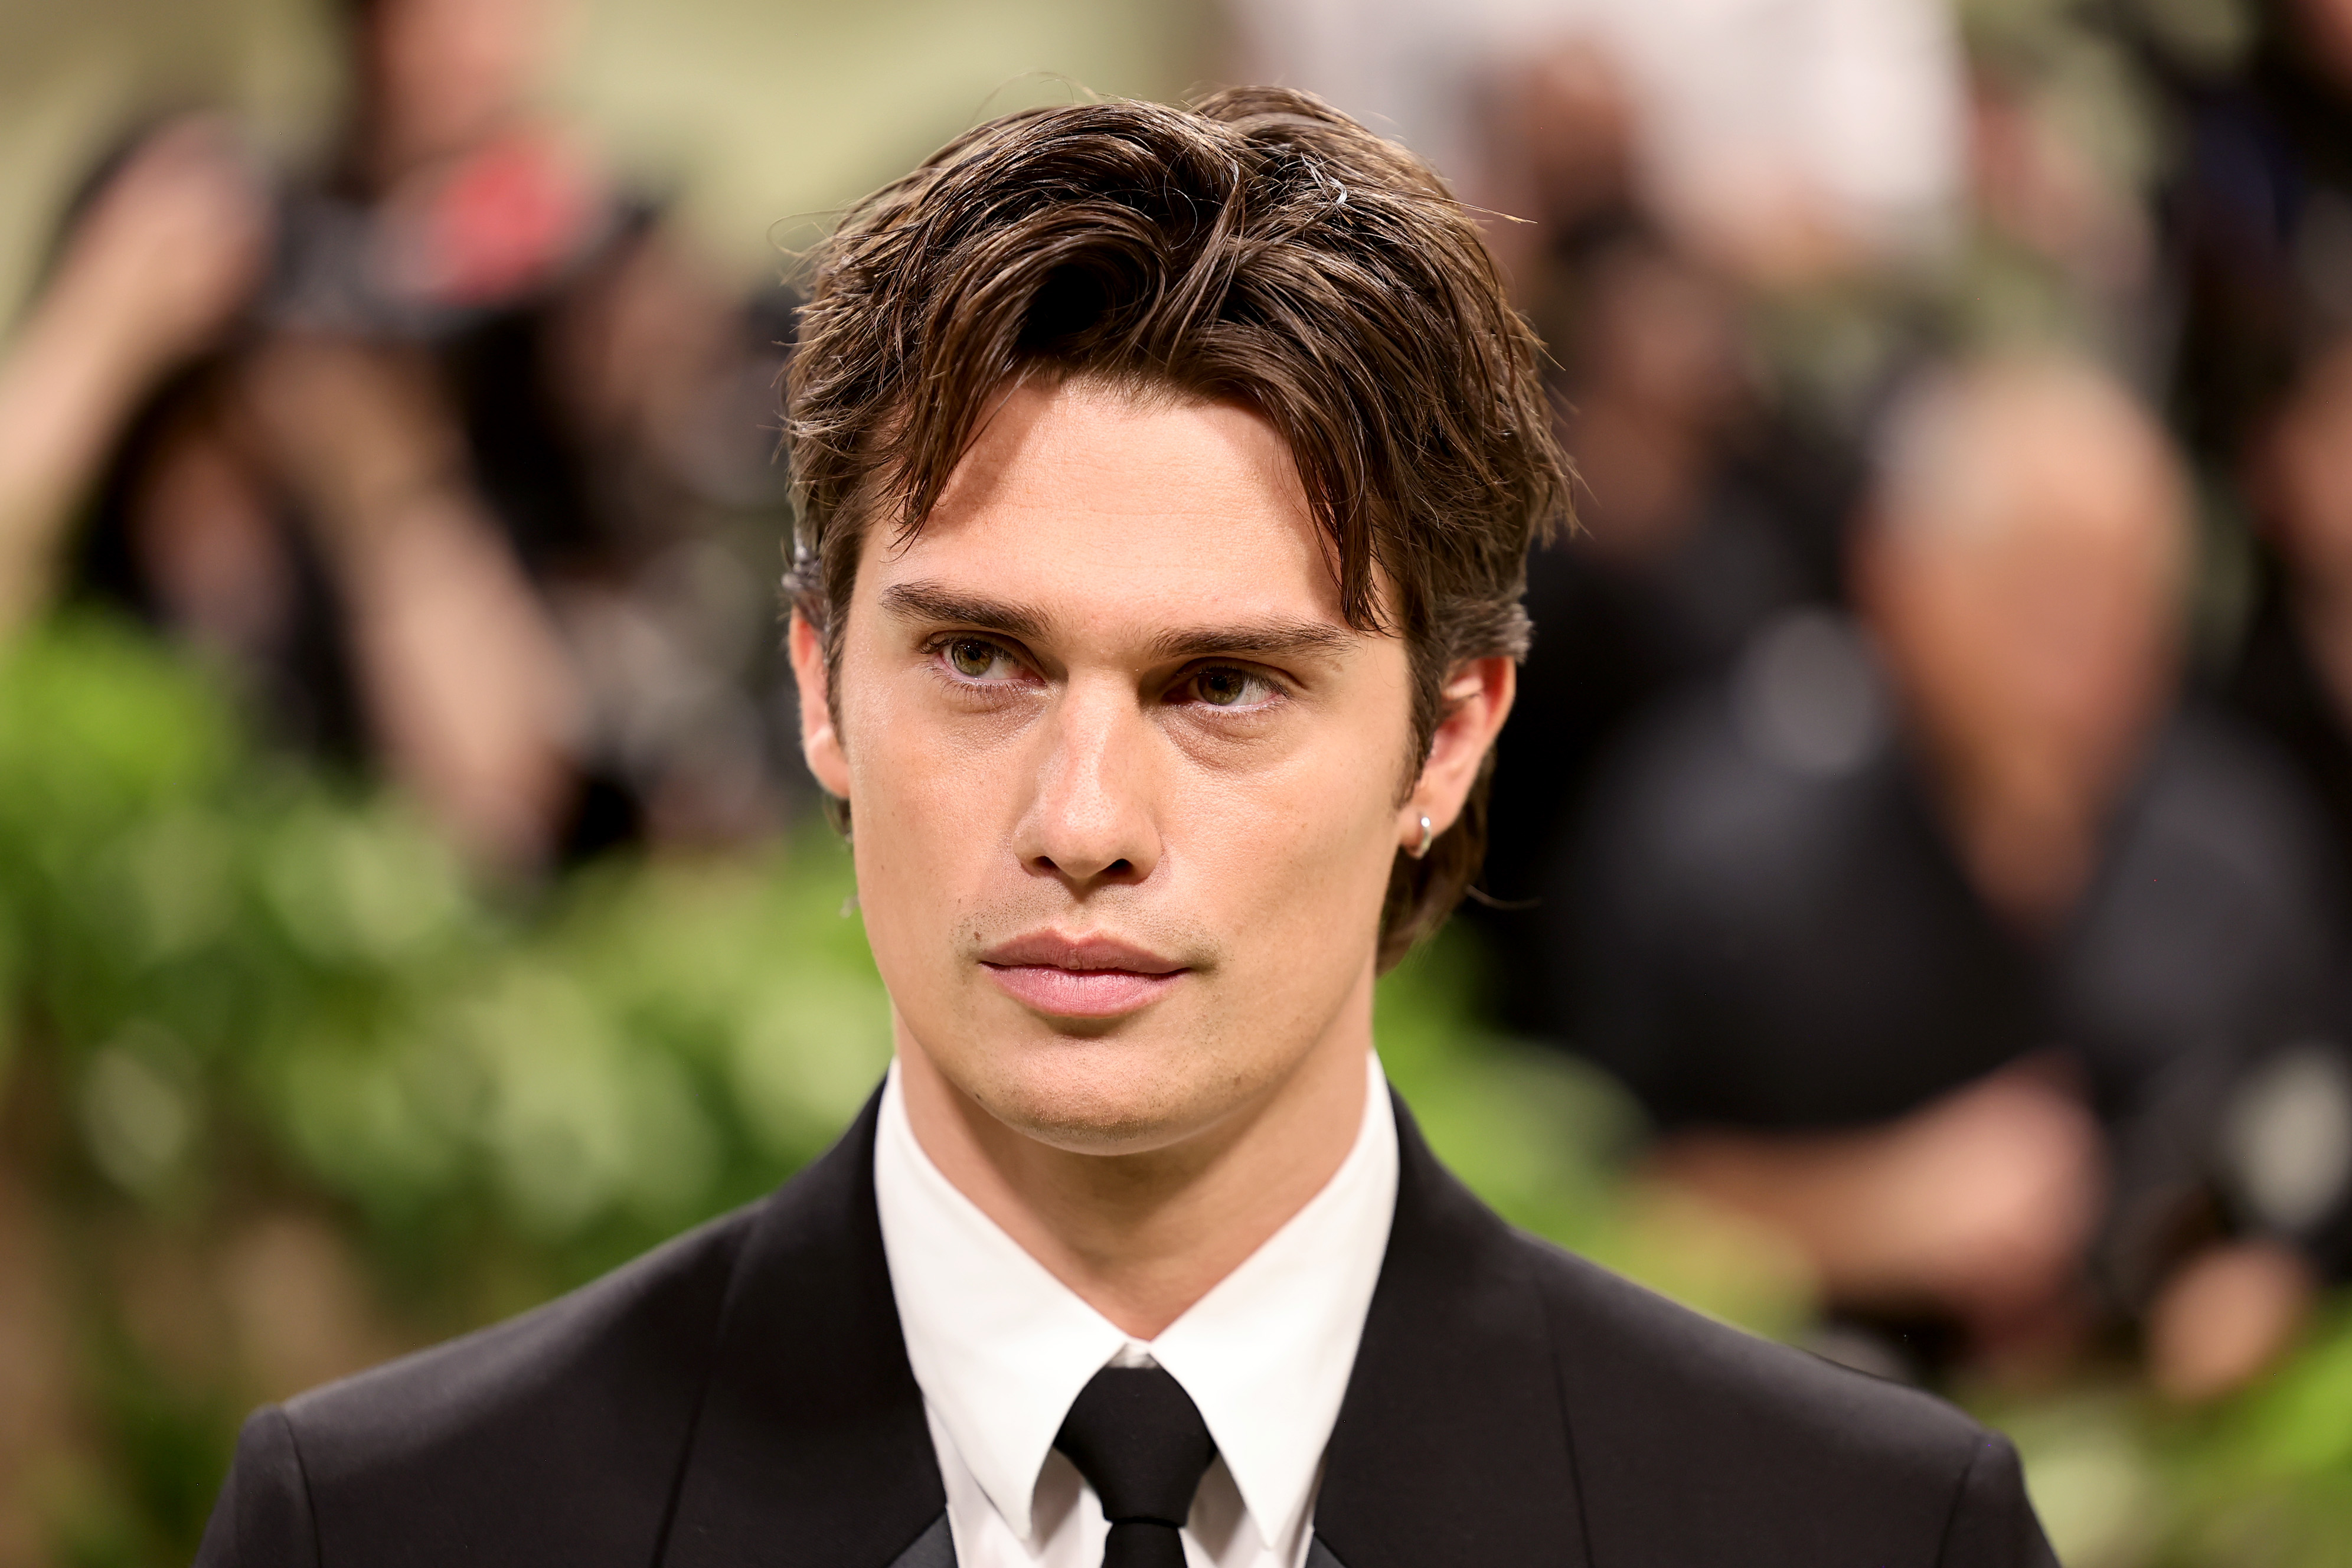 Nicholas Galitzine in a suit and tie poses in a formal setting, with a blurred background of people and greenery